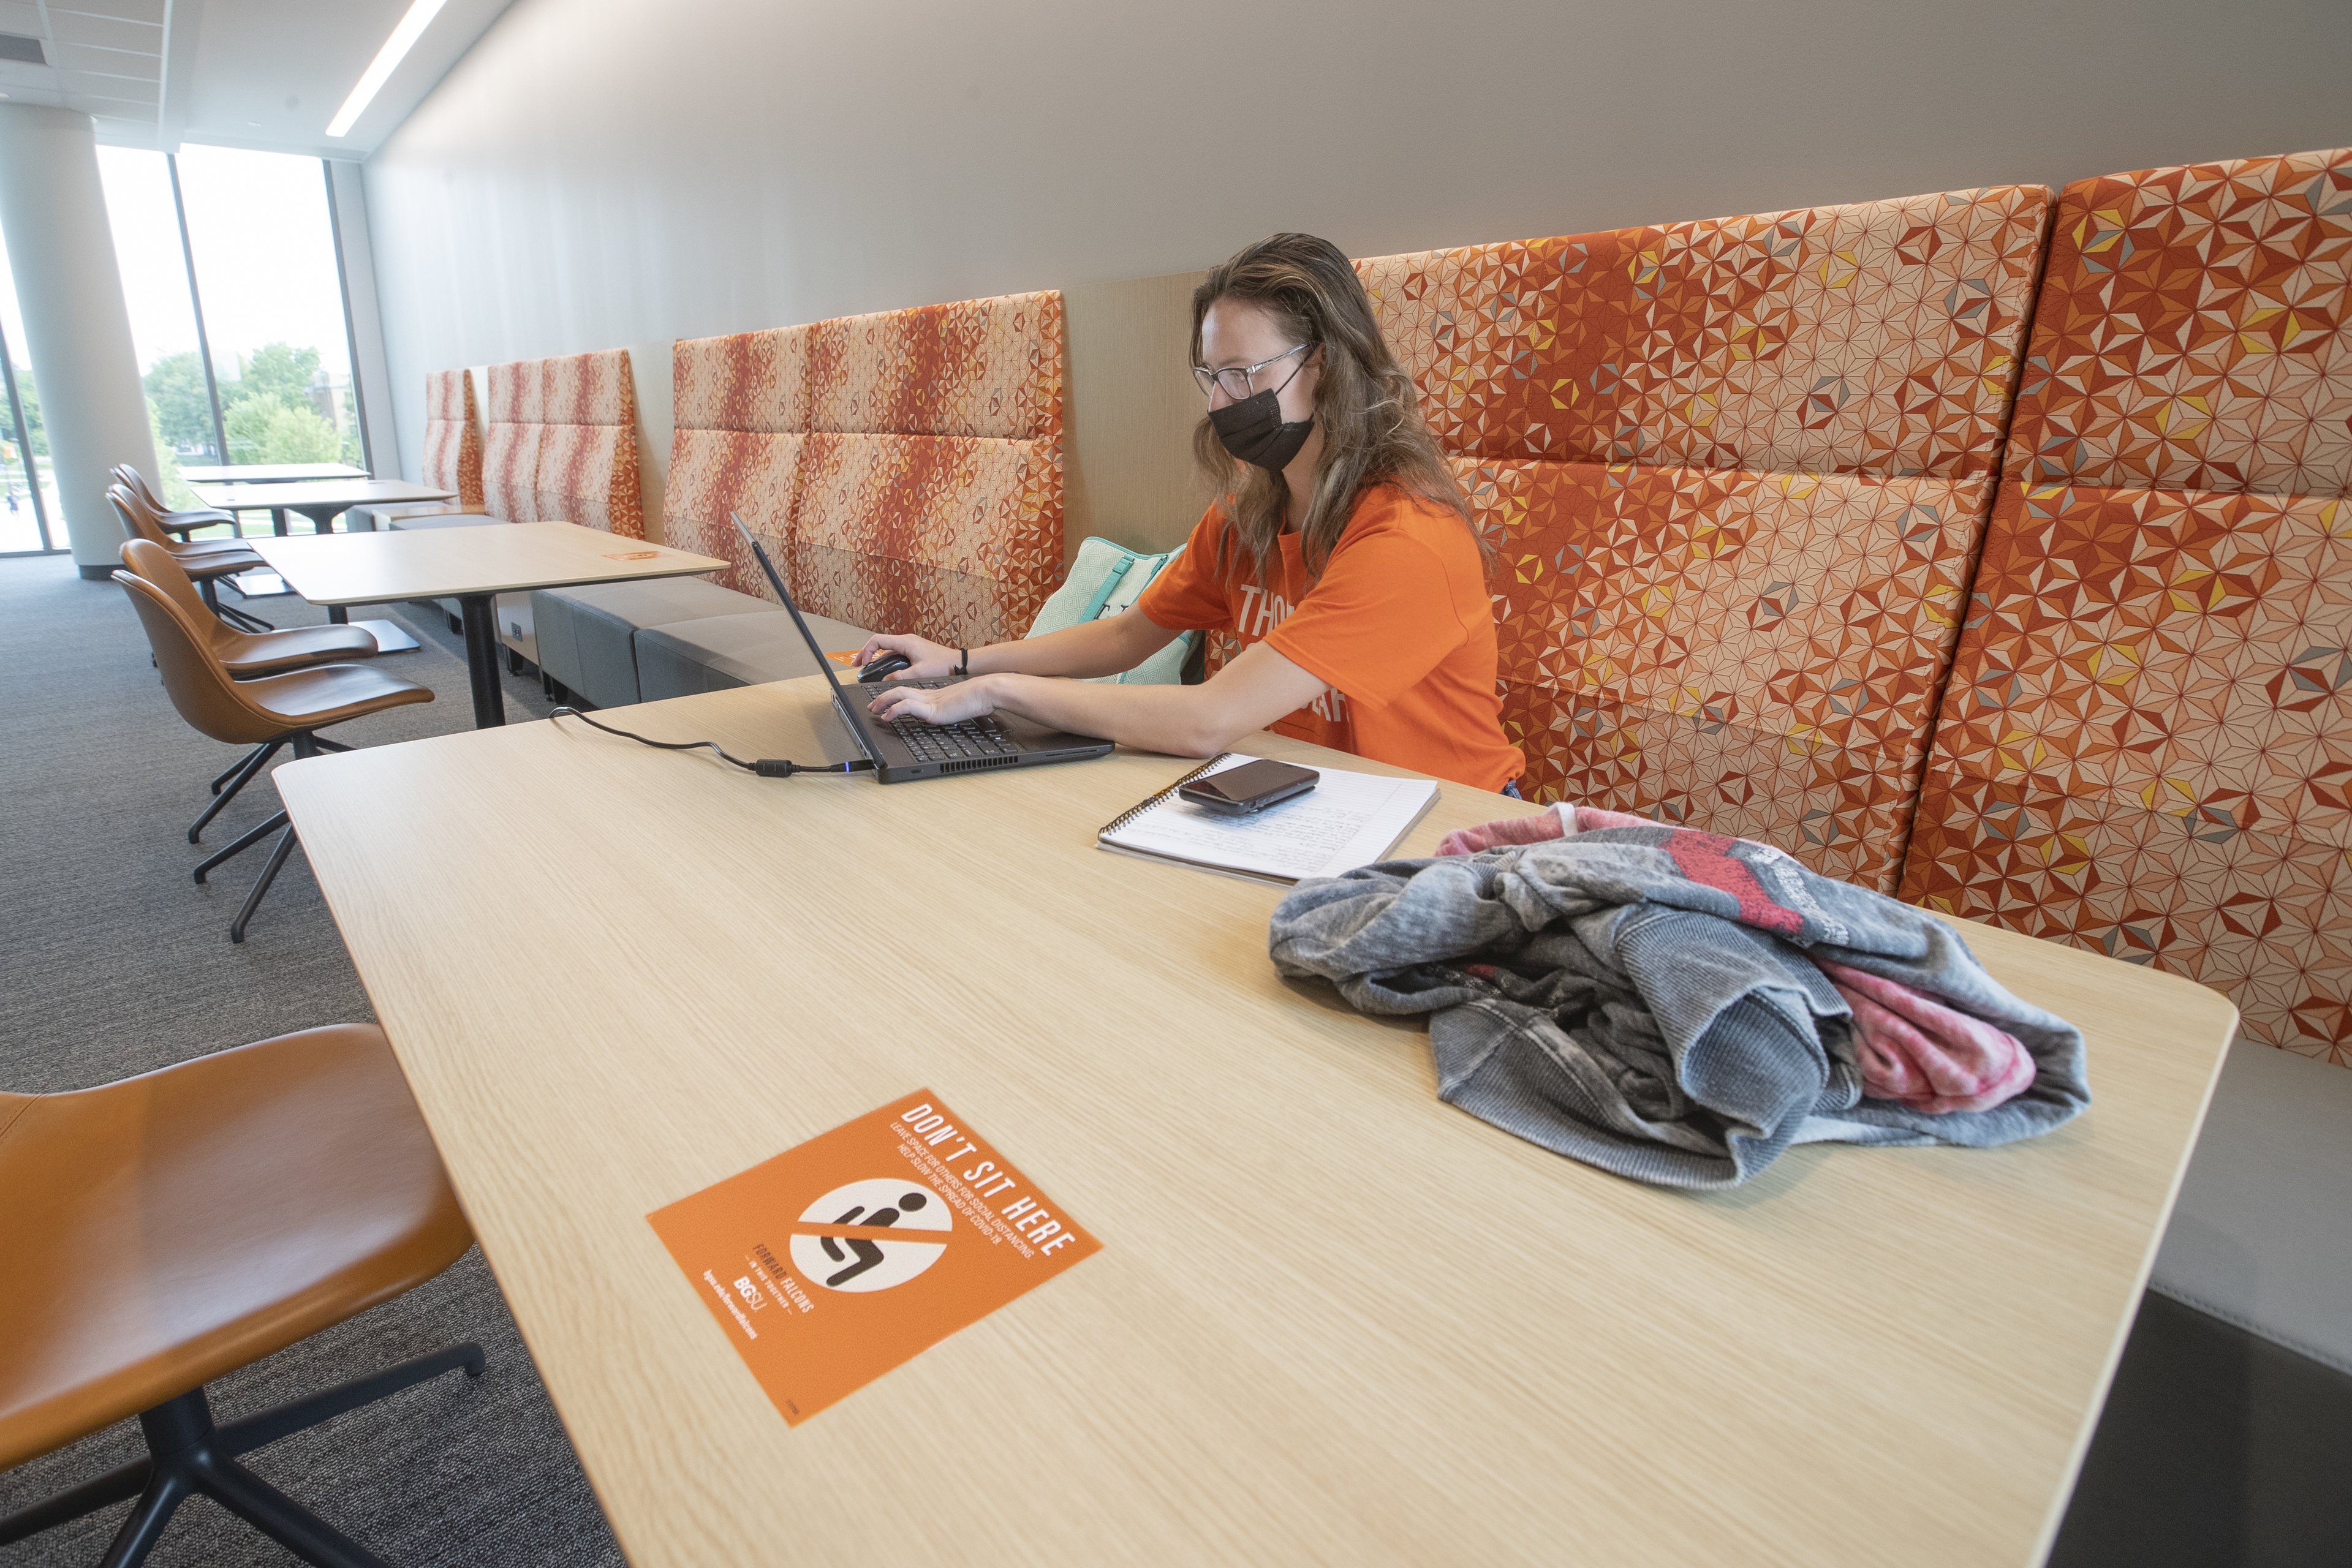 Tessa Haselman a senior VCT major from Leipsic, Ohio found a quiet corner in the Maurer Center to work